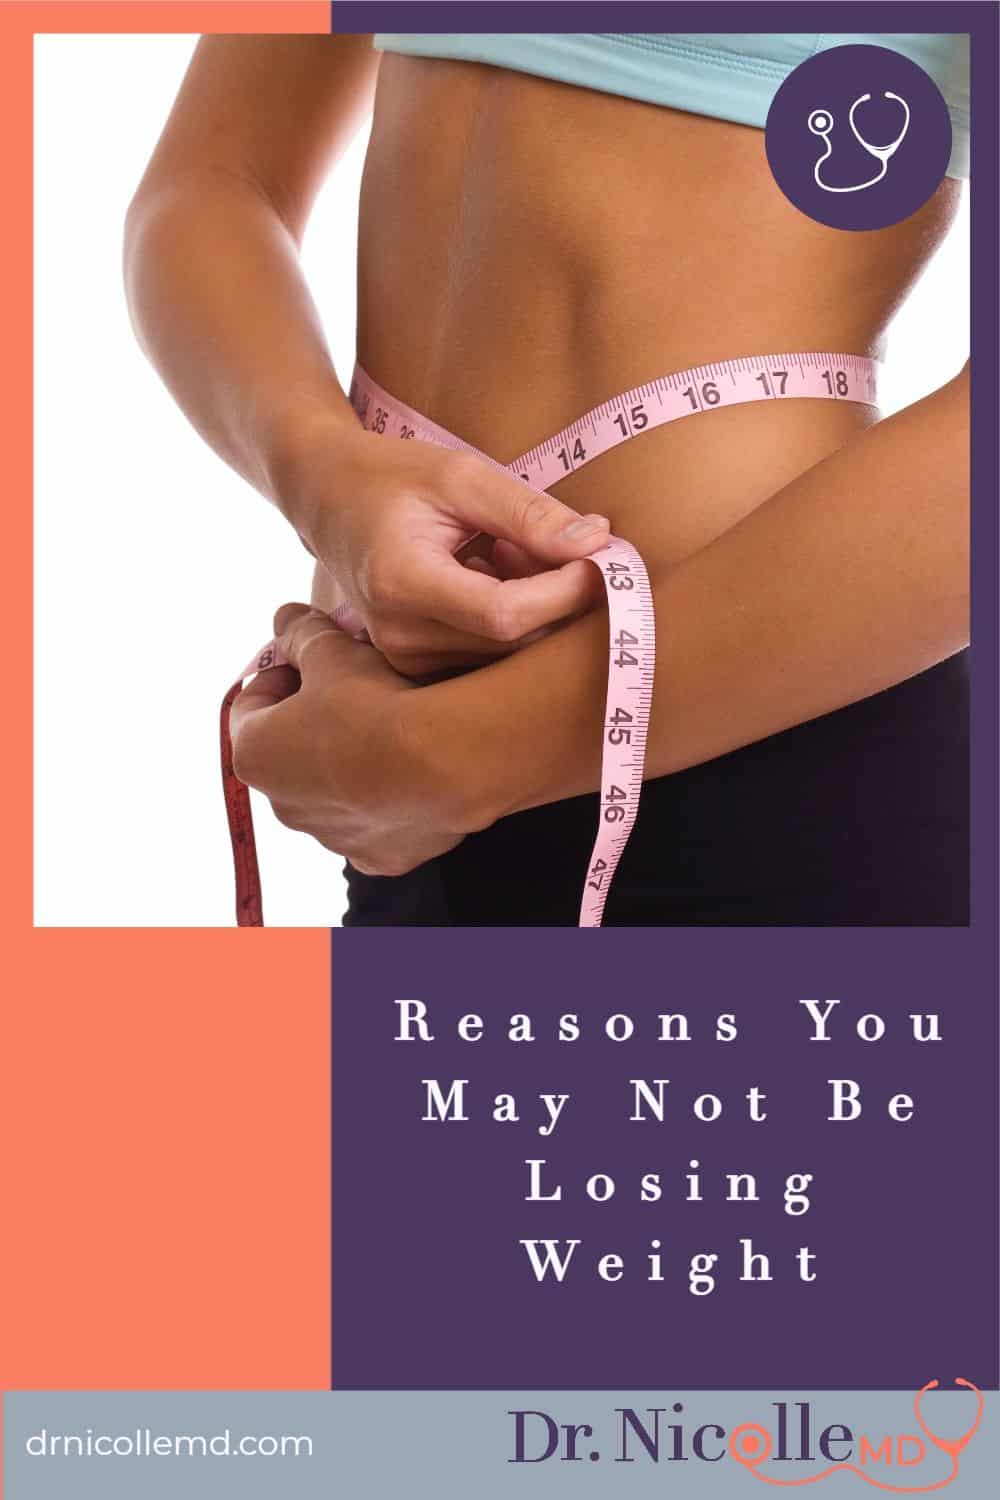 Why You May Not Be Losing Weight